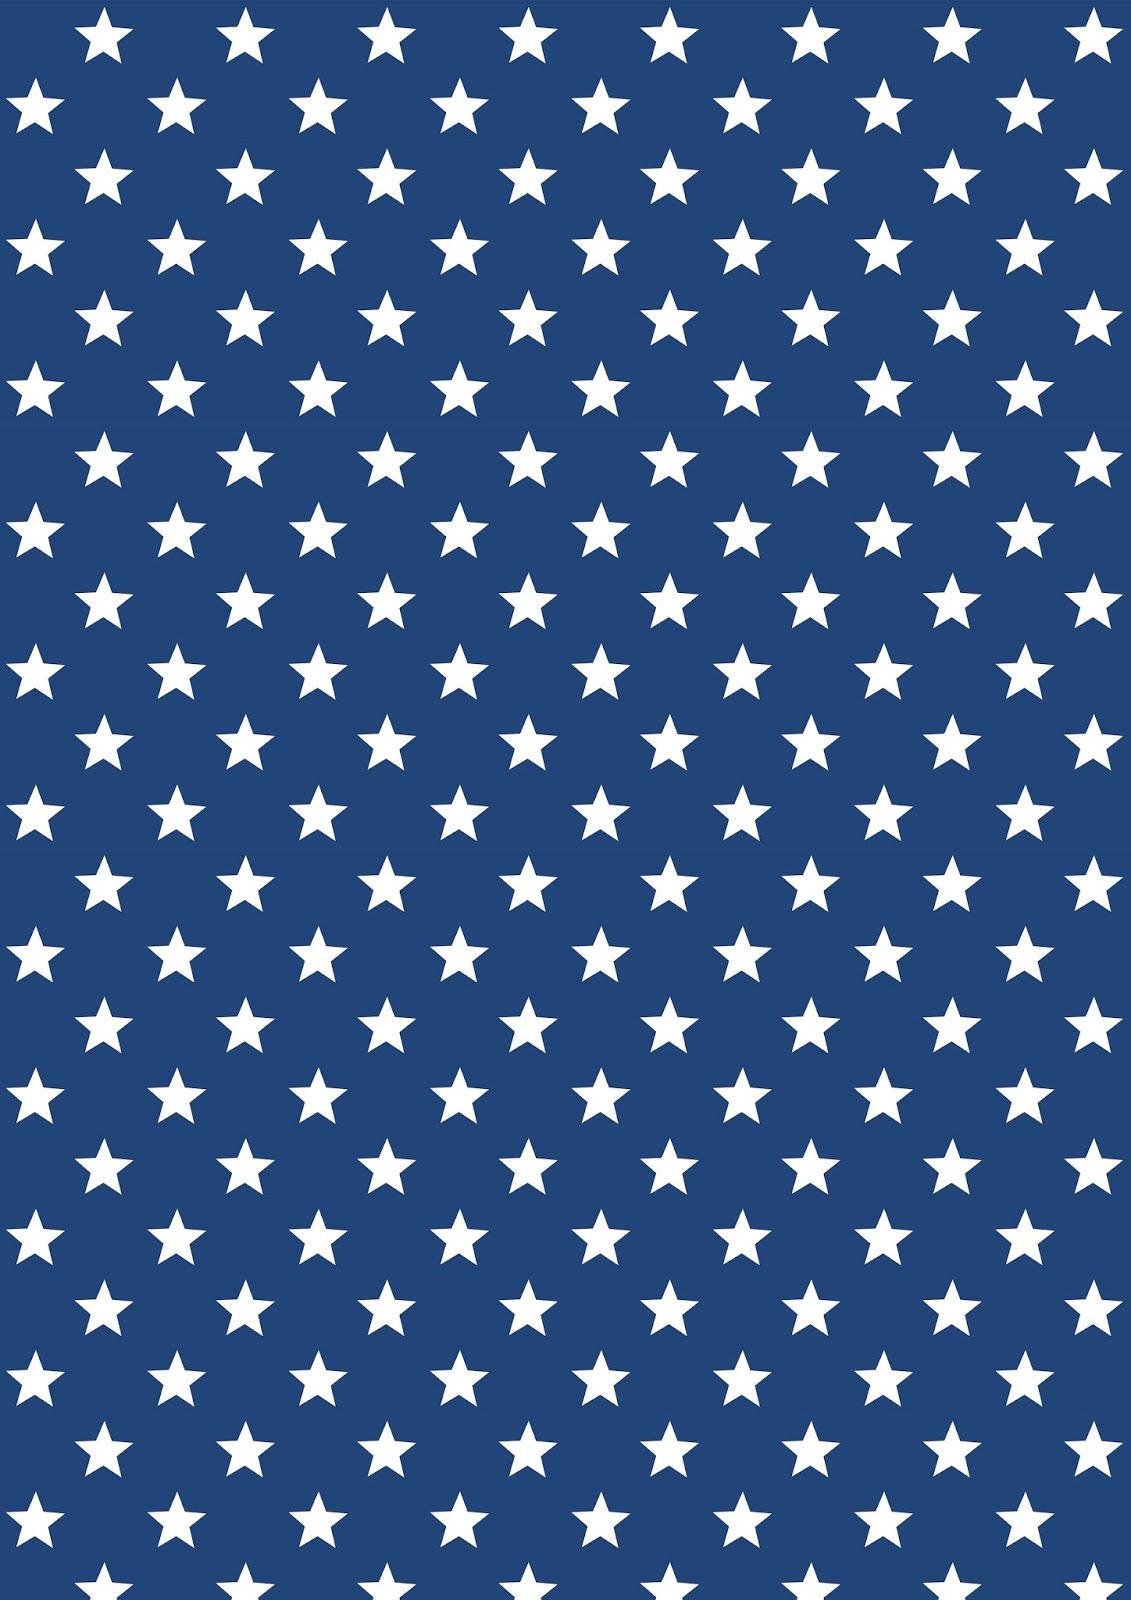 Free printable stars and stripes pattern papers   ausdruckbares 